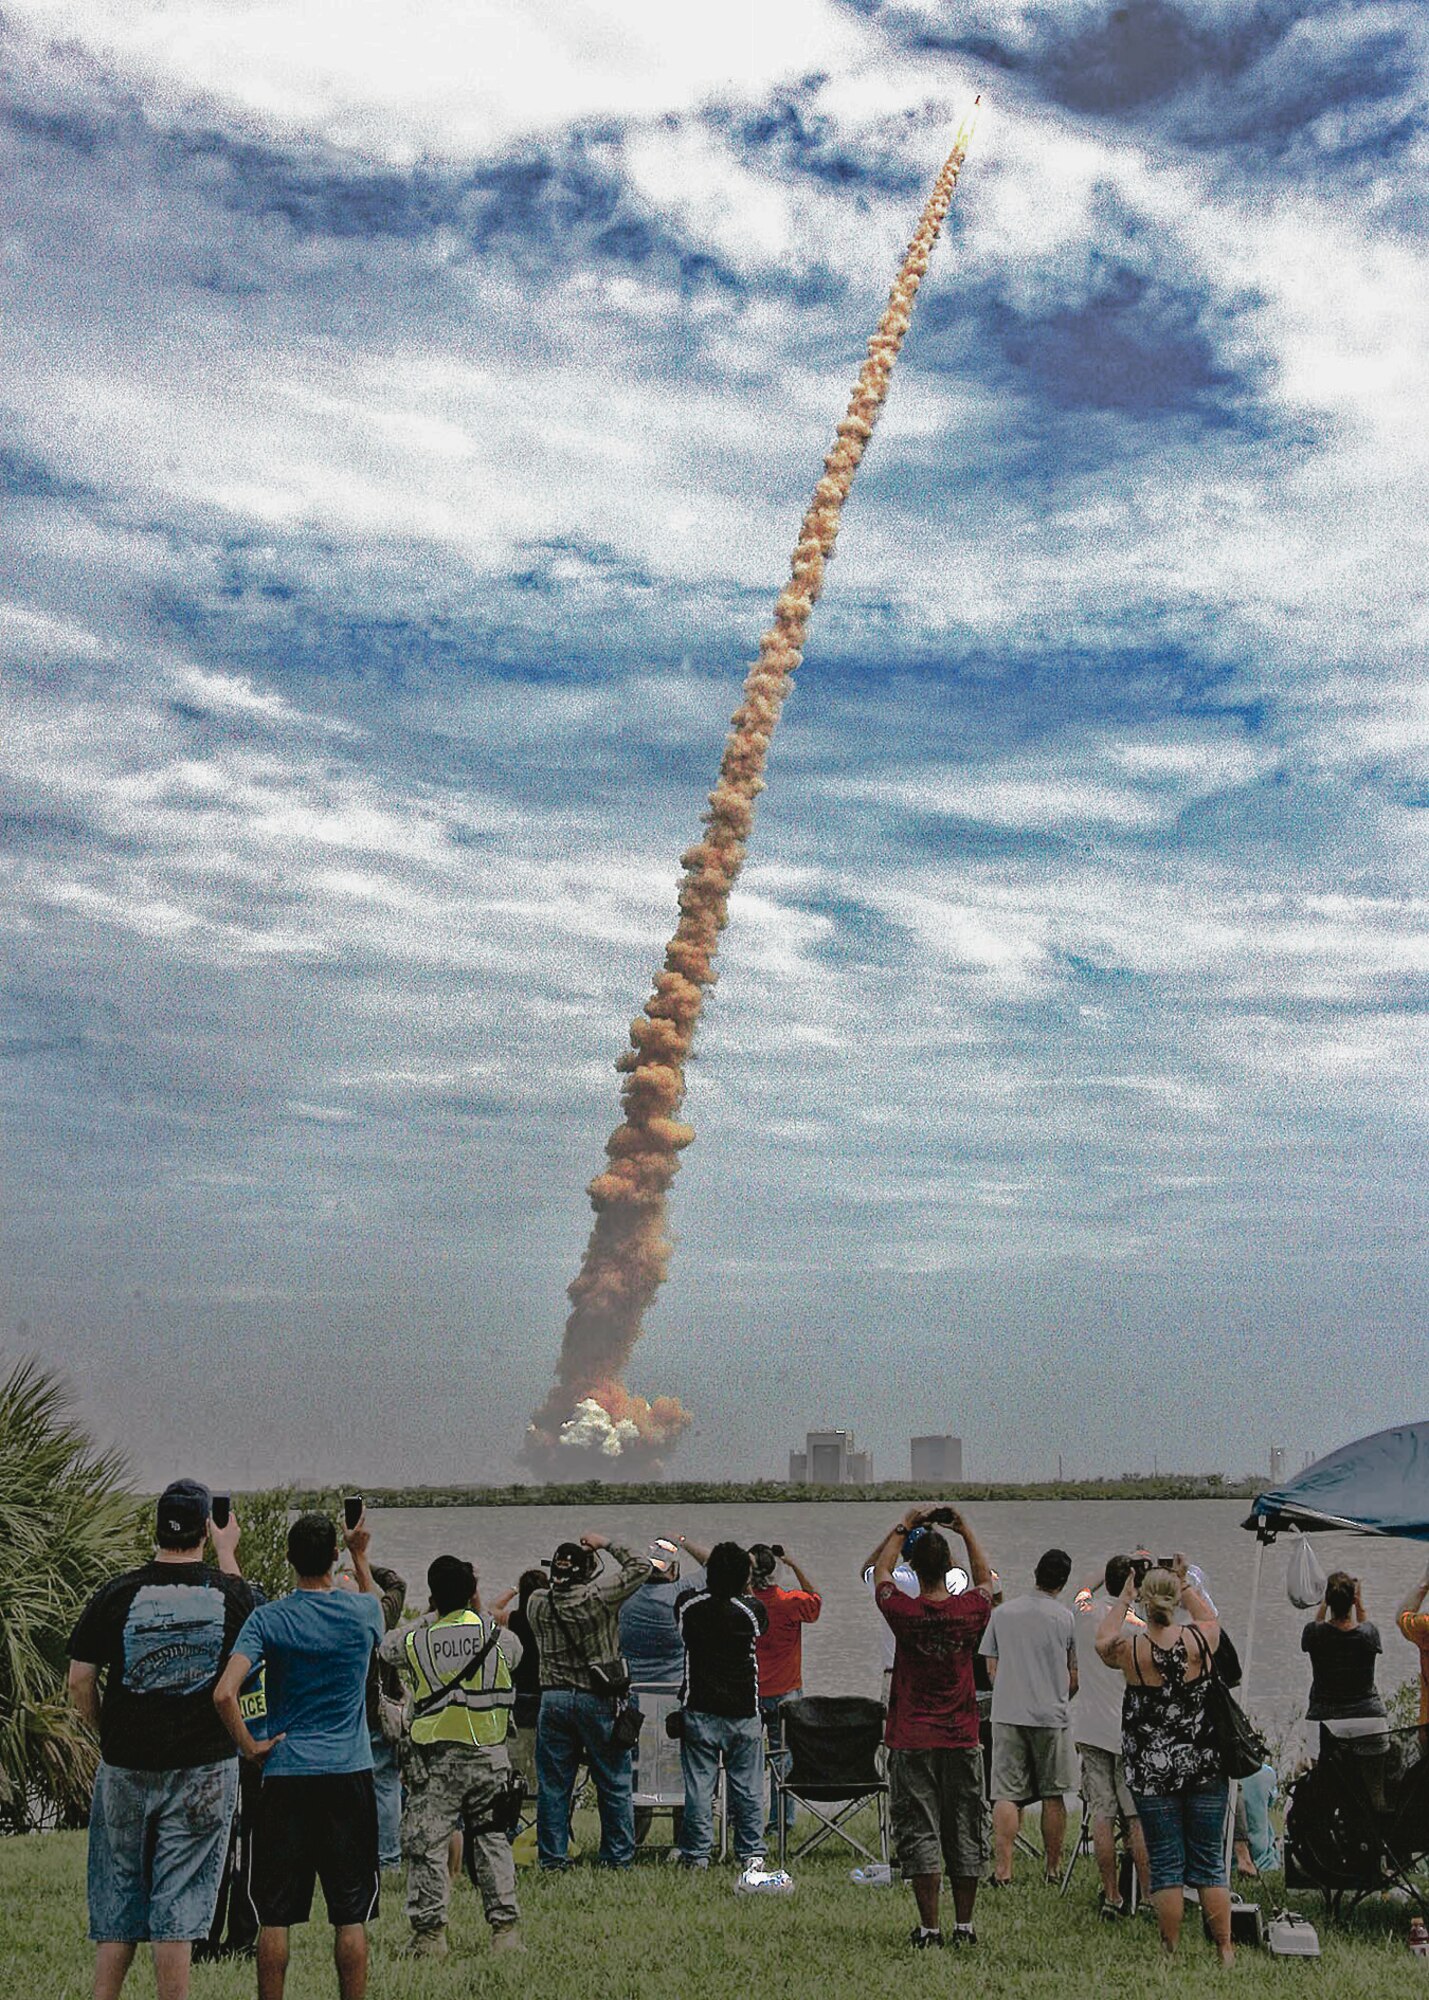 Air Force members and their guests at Cape Canaveral AFS, Fla., watch the final launch of a space shuttle July 8, 2011, from the 45th Space Wing VIP Viewing Area on the NASA Causeway, as Shuttle Atlantis roars into the sky. The success of STS-135 marked the culmination of three decades of support for NASA Space Shuttle missions by the wing, other Air Force units and government agencies, and their mission partners. (Courtesy photo/Ron Trevino)